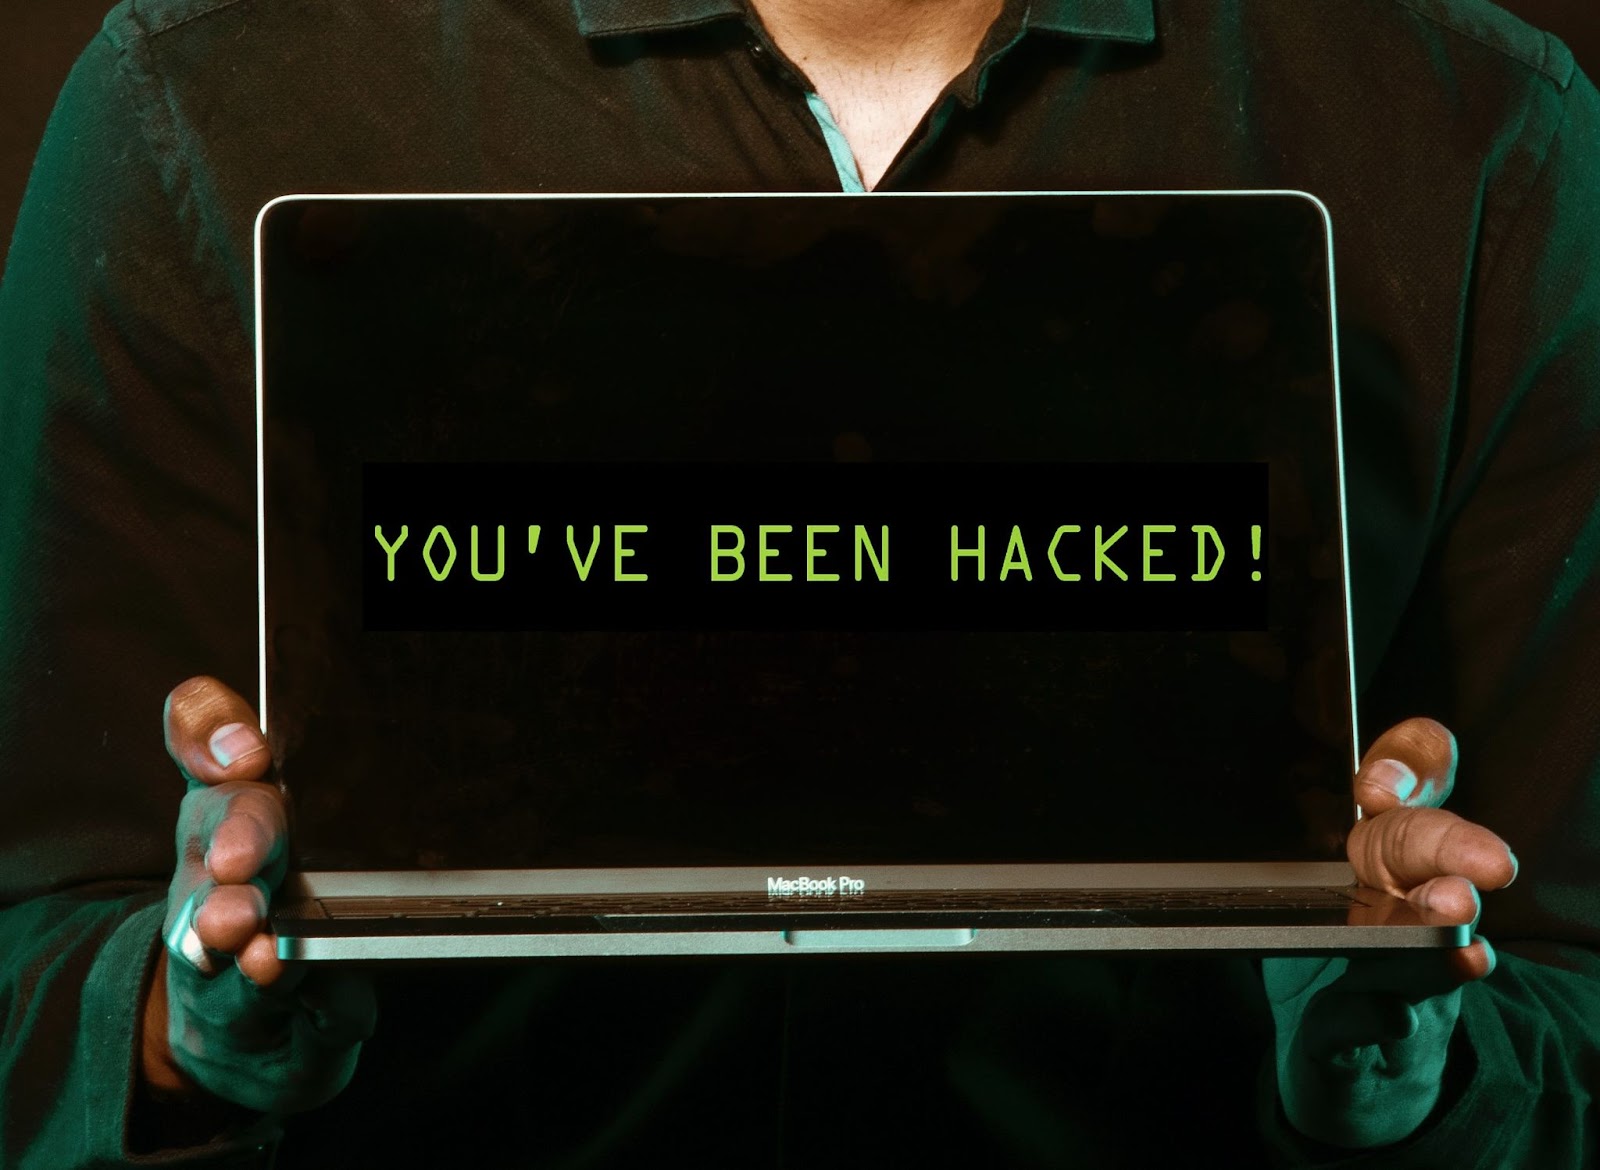 A man holding a laptop, with the laptop screen saying "You've been hacked".